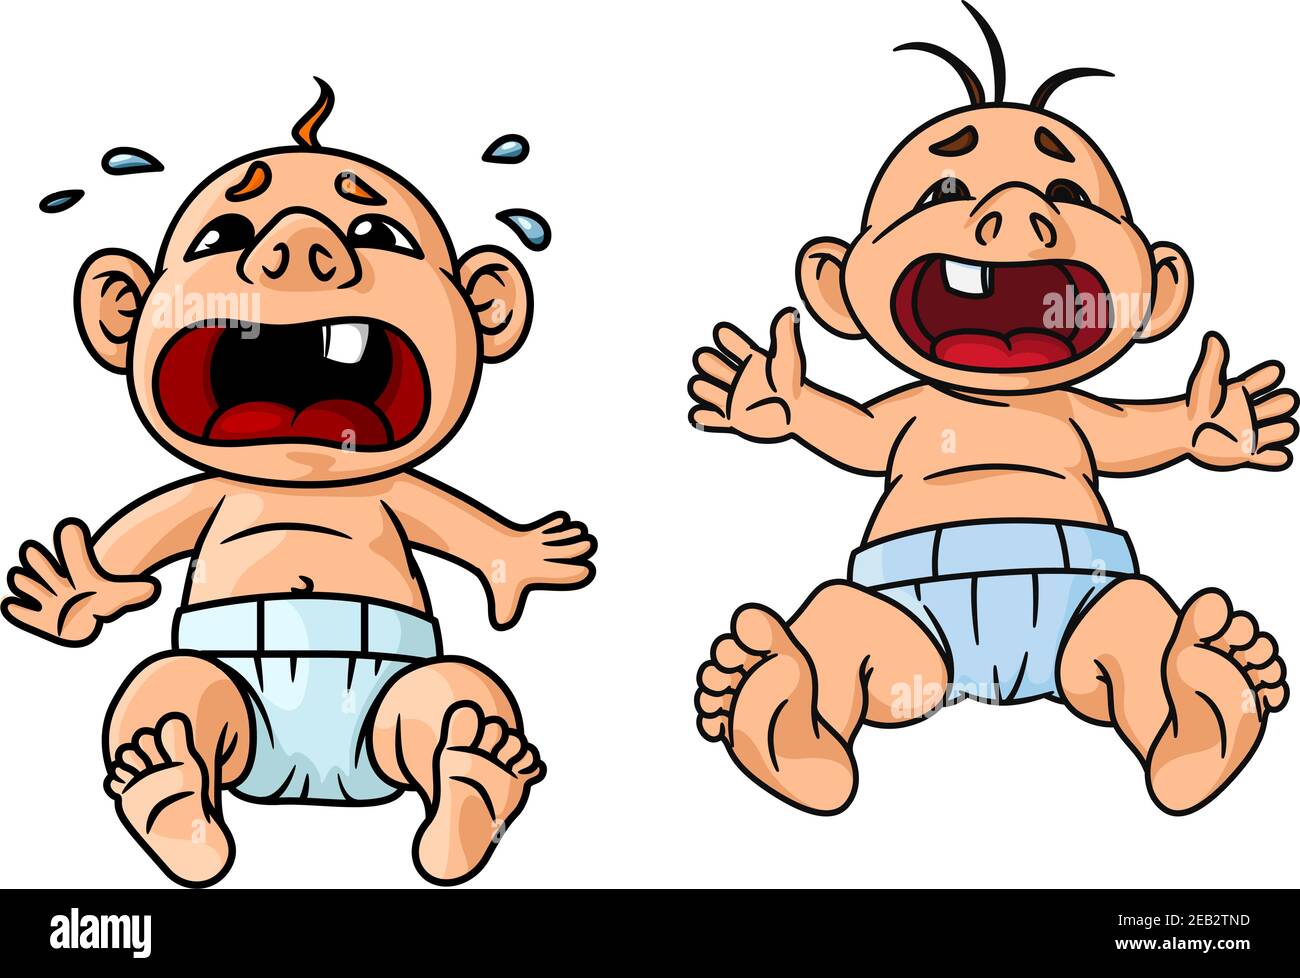 Cartoon crying babies with wide open mouths and tear drops around one of them, for childish theme concept Stock Vector